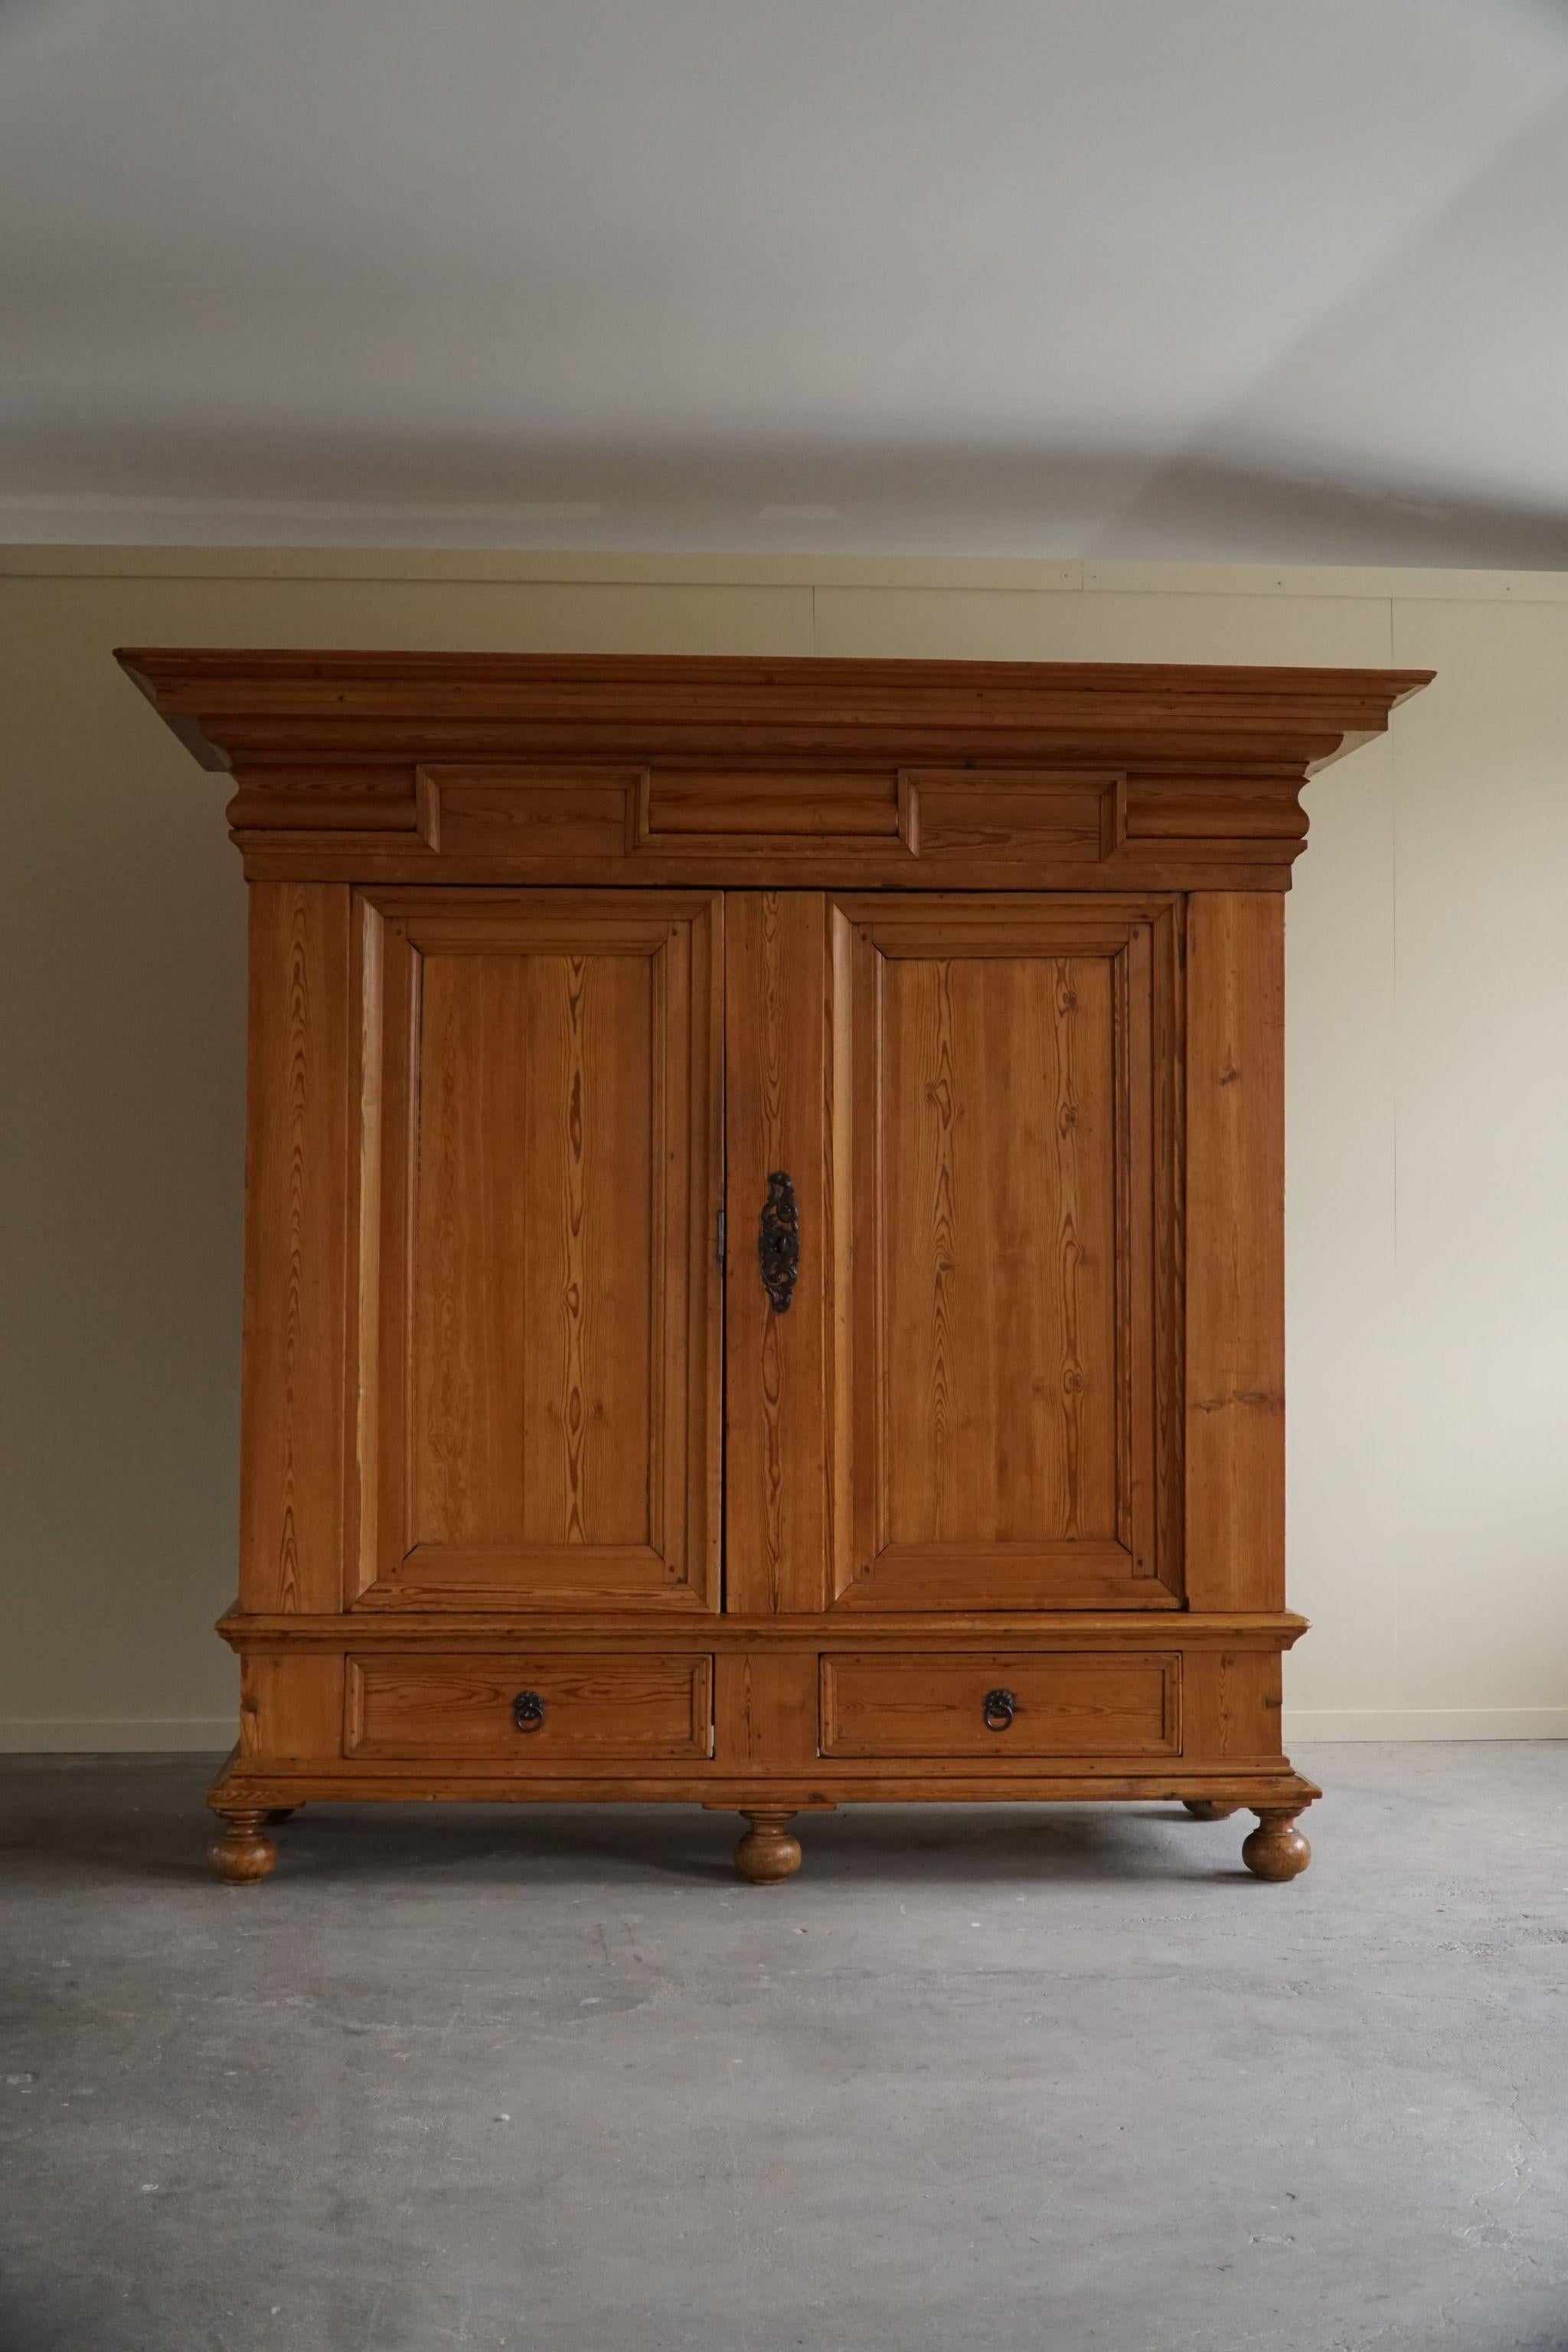 Extraordinary cabinet in solid pine. Made by Danish cabinetmaker Chr. A. Nielsen in 1770 for Hotel Prindsen, Roskilde(label inside). Such great quality, details and craftmanship in this cabinet. Hotel Prindsen dates back to 1695 and was privileged